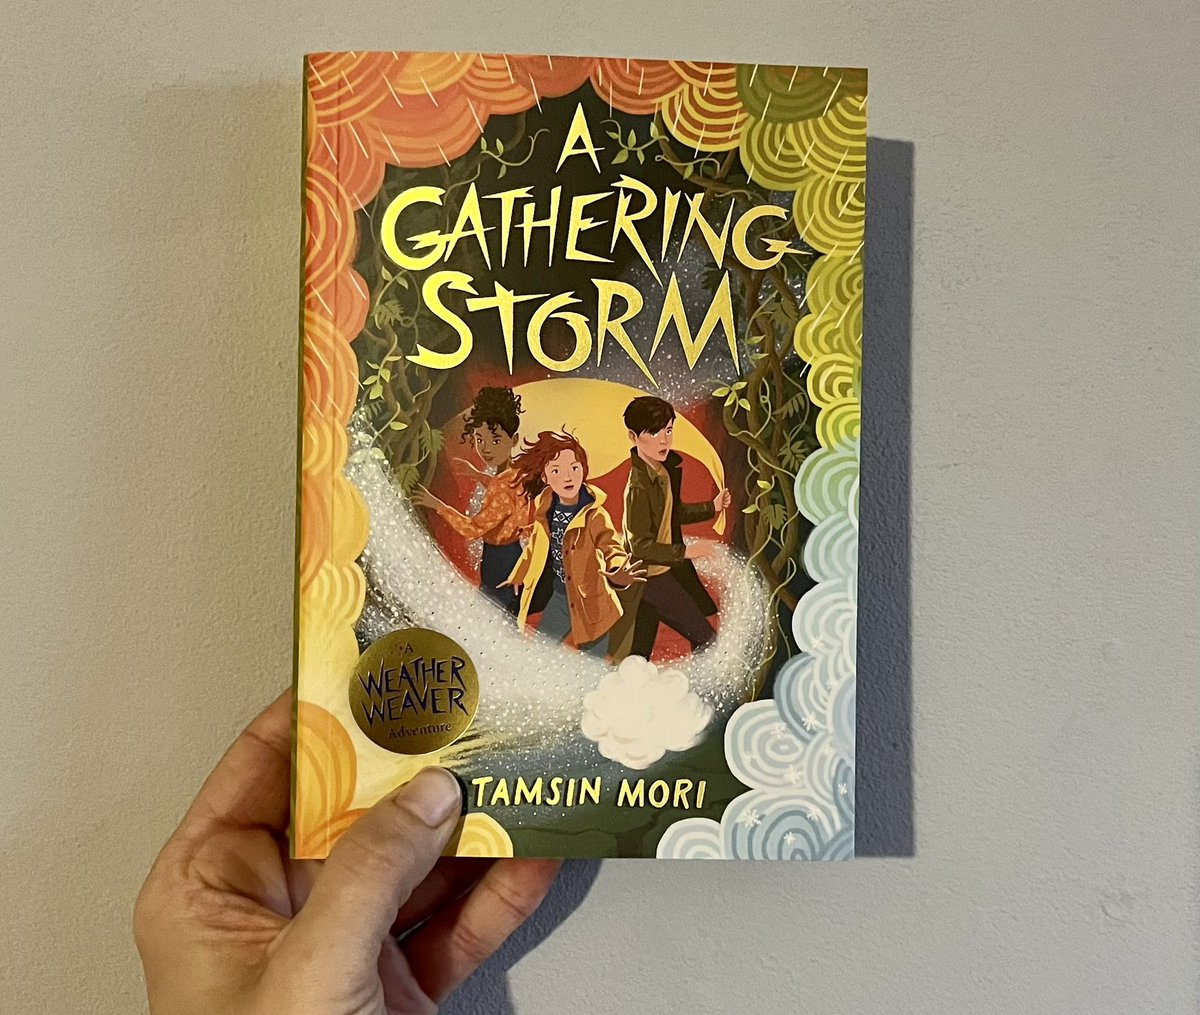 Another apt read to enjoy during #StormEunice! #AGatheringStorm by @MoriTamsin - As weather weavers from over the globe come together to trade magic & stories, Stella & Nimbus can’t wait to experience the Gathering. But they’re in for a frosty welcome. #DavidDean